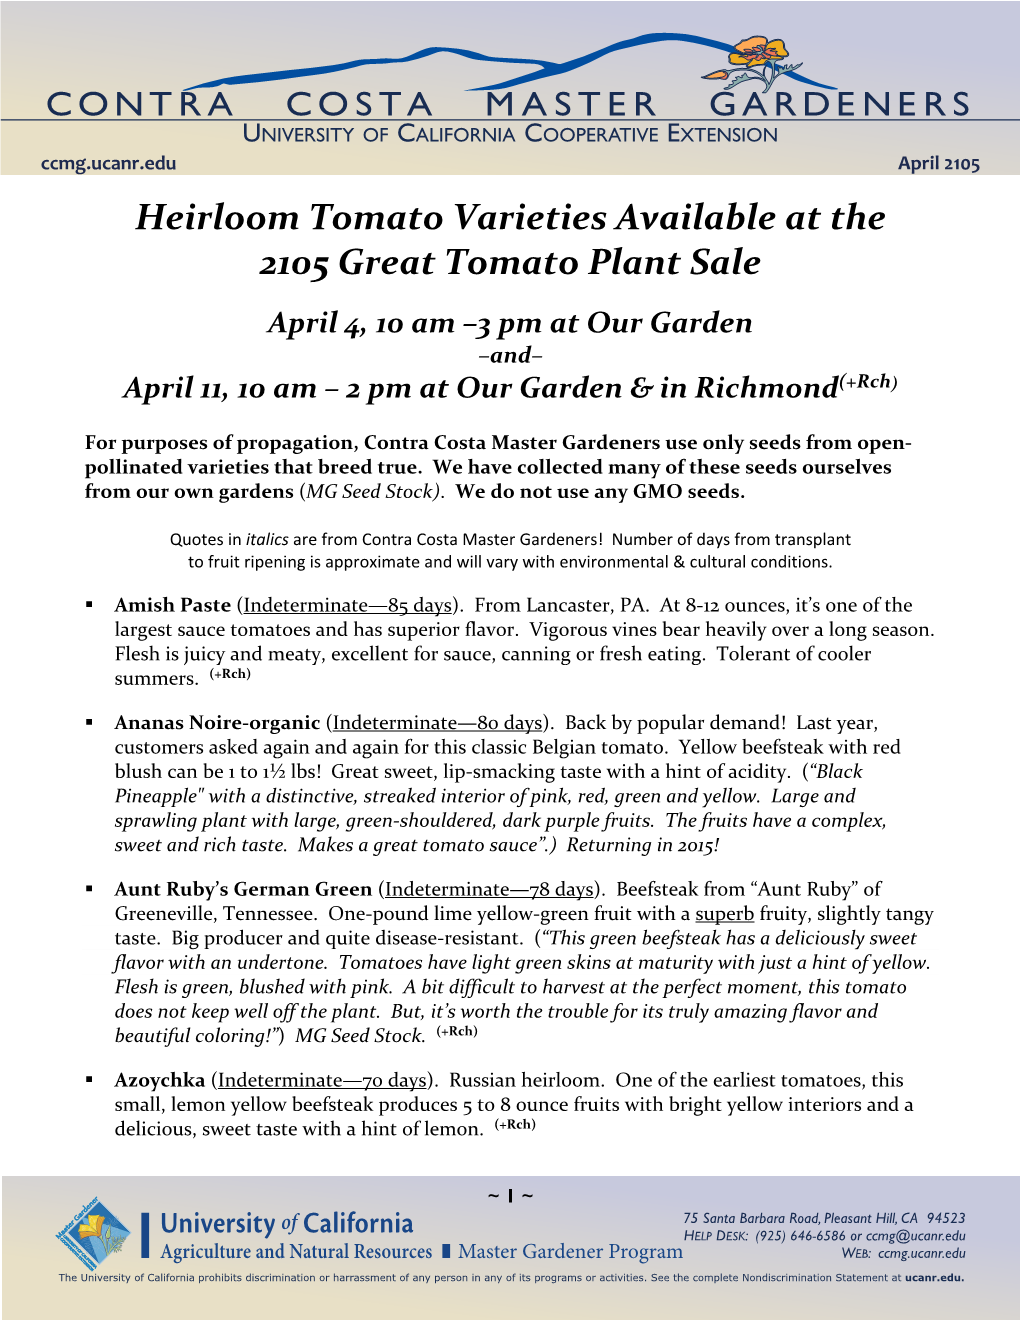 Heirloom Tomato Varieties Available at the 2105 Great Tomato Plant Sale